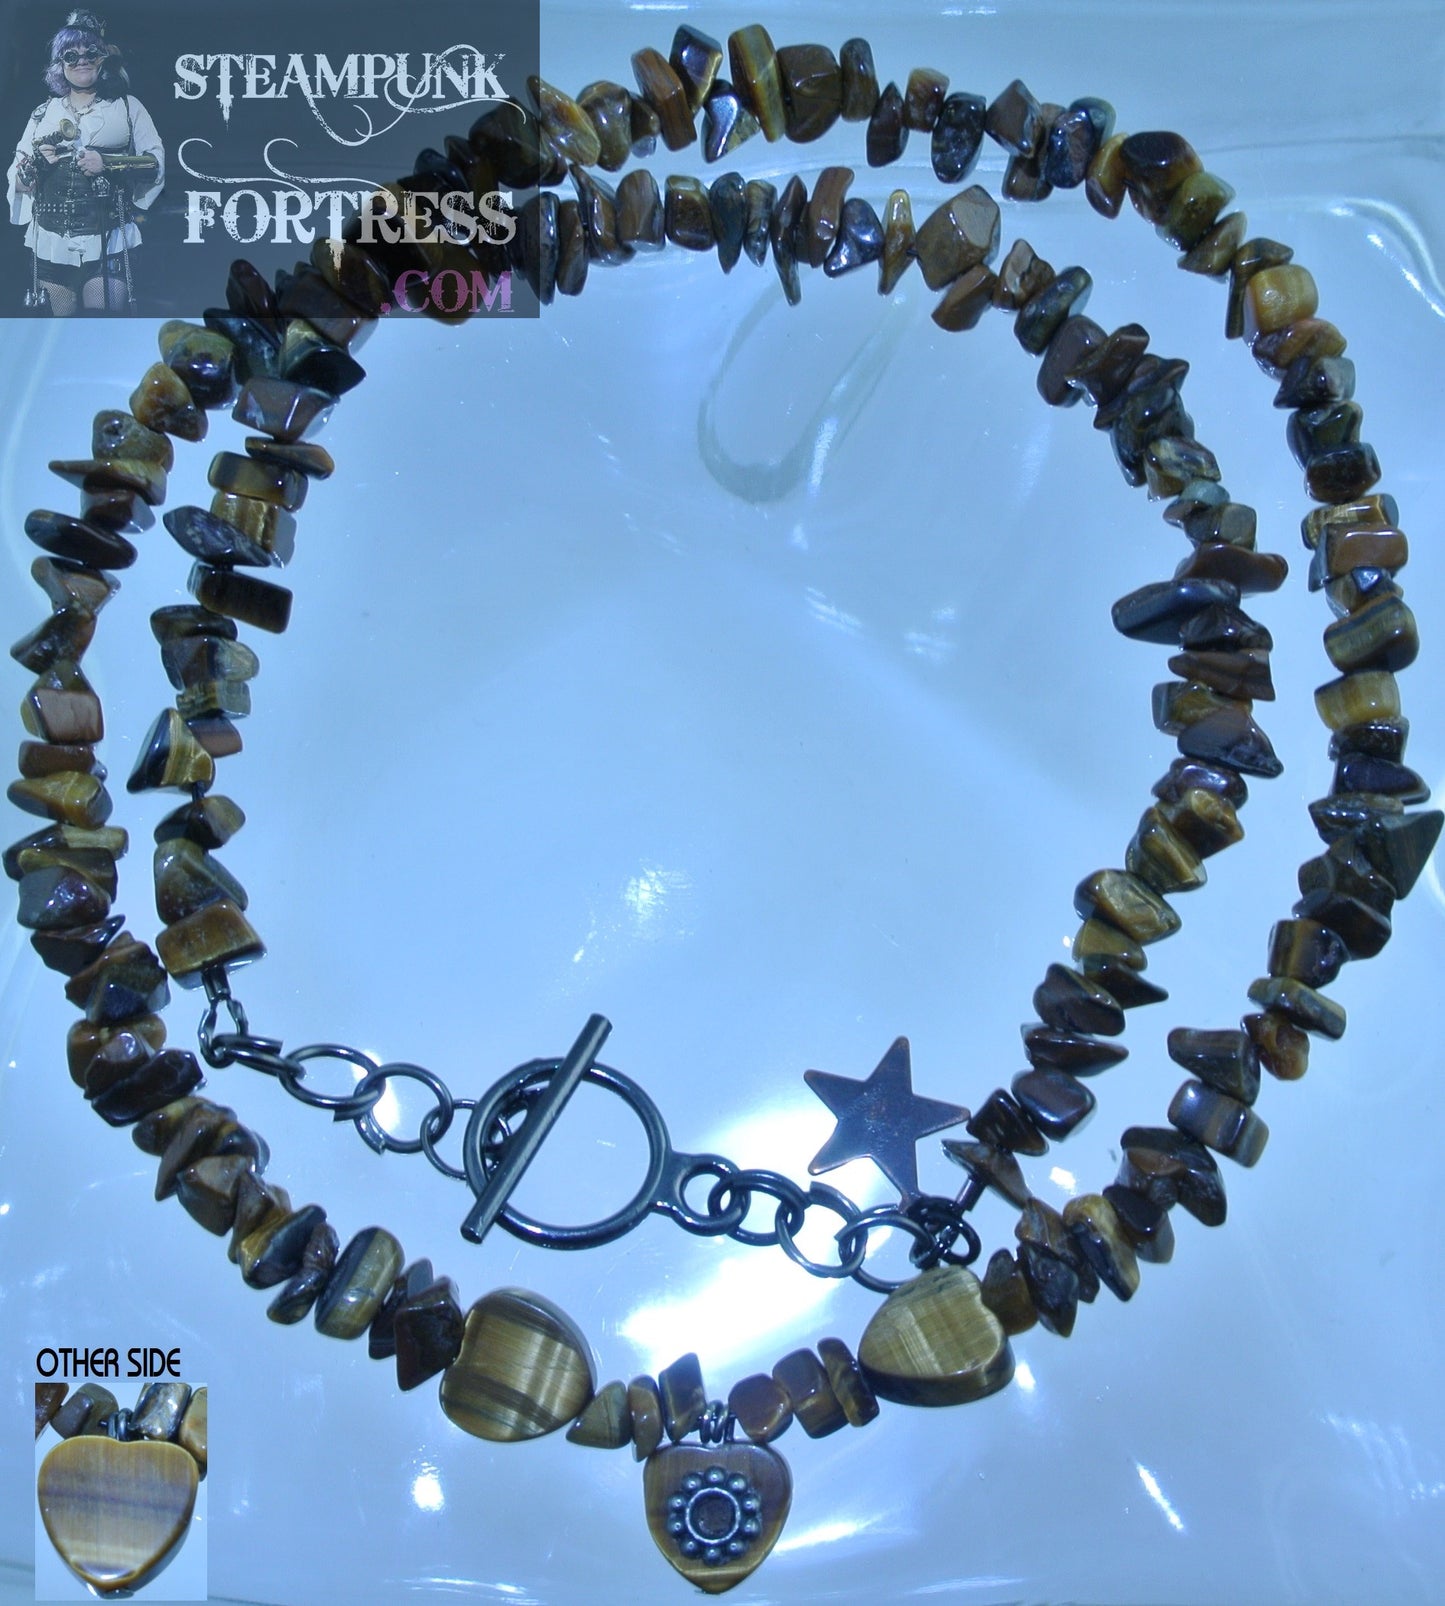 GUNMETAL TIGERS EYE GEMSTONES STONES HEARTS CHIPS GEAR NECKLACE SET AVAILABLE STARR WILDE STEAMPUNK 2 SIDED REVERSIBLE